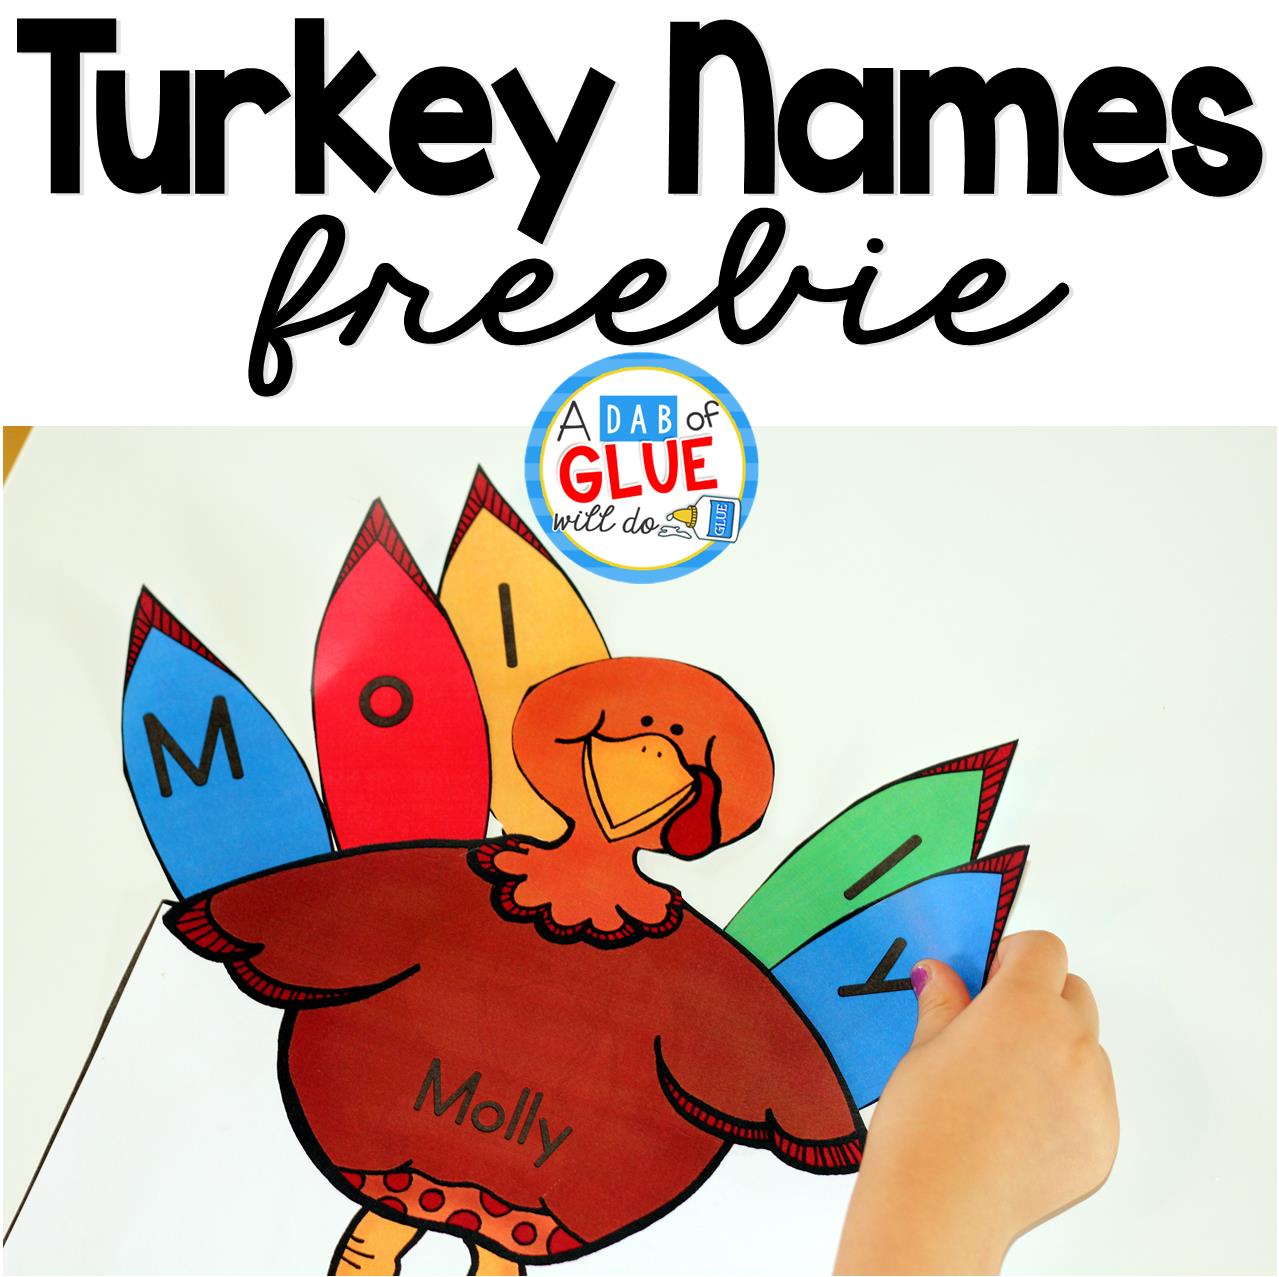 Turkey Names is the perfect fall activity to have preschool and kindergarten students practicing spelling their name. This Thanksgiving printable is editable and free. 